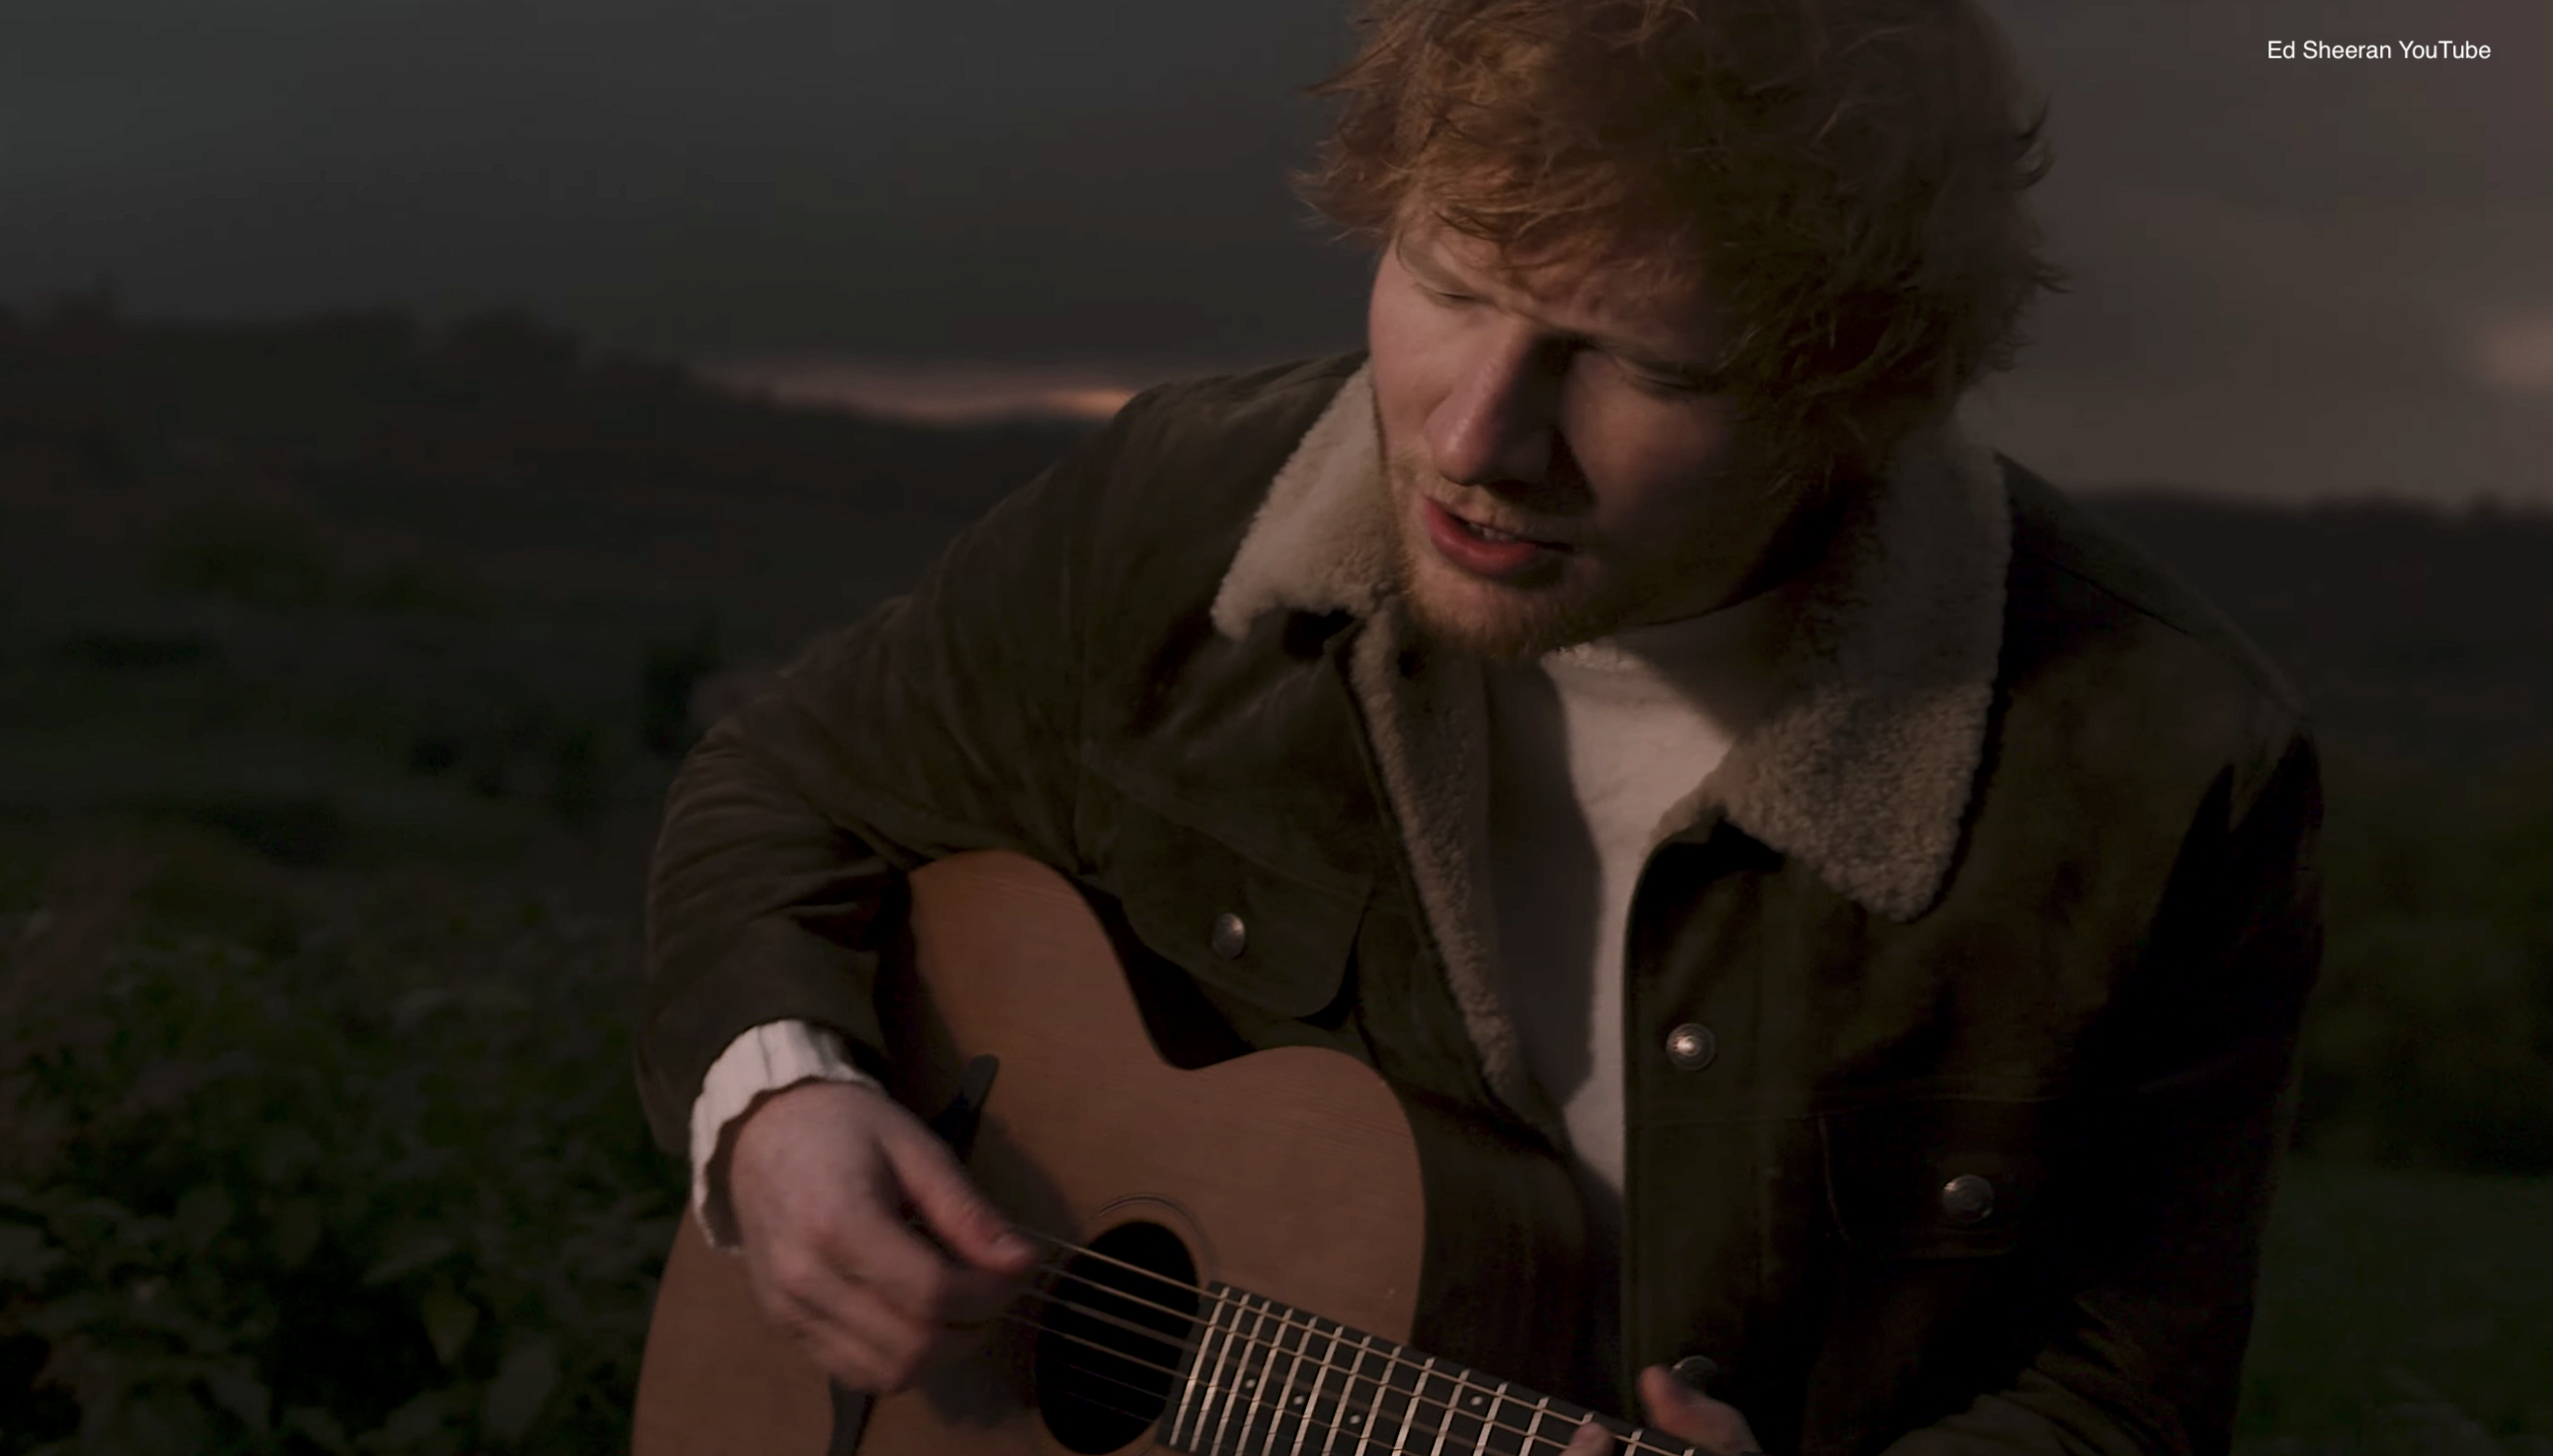 Ed Sheeran Gifts Fans with Surprise Track “Afterglow”